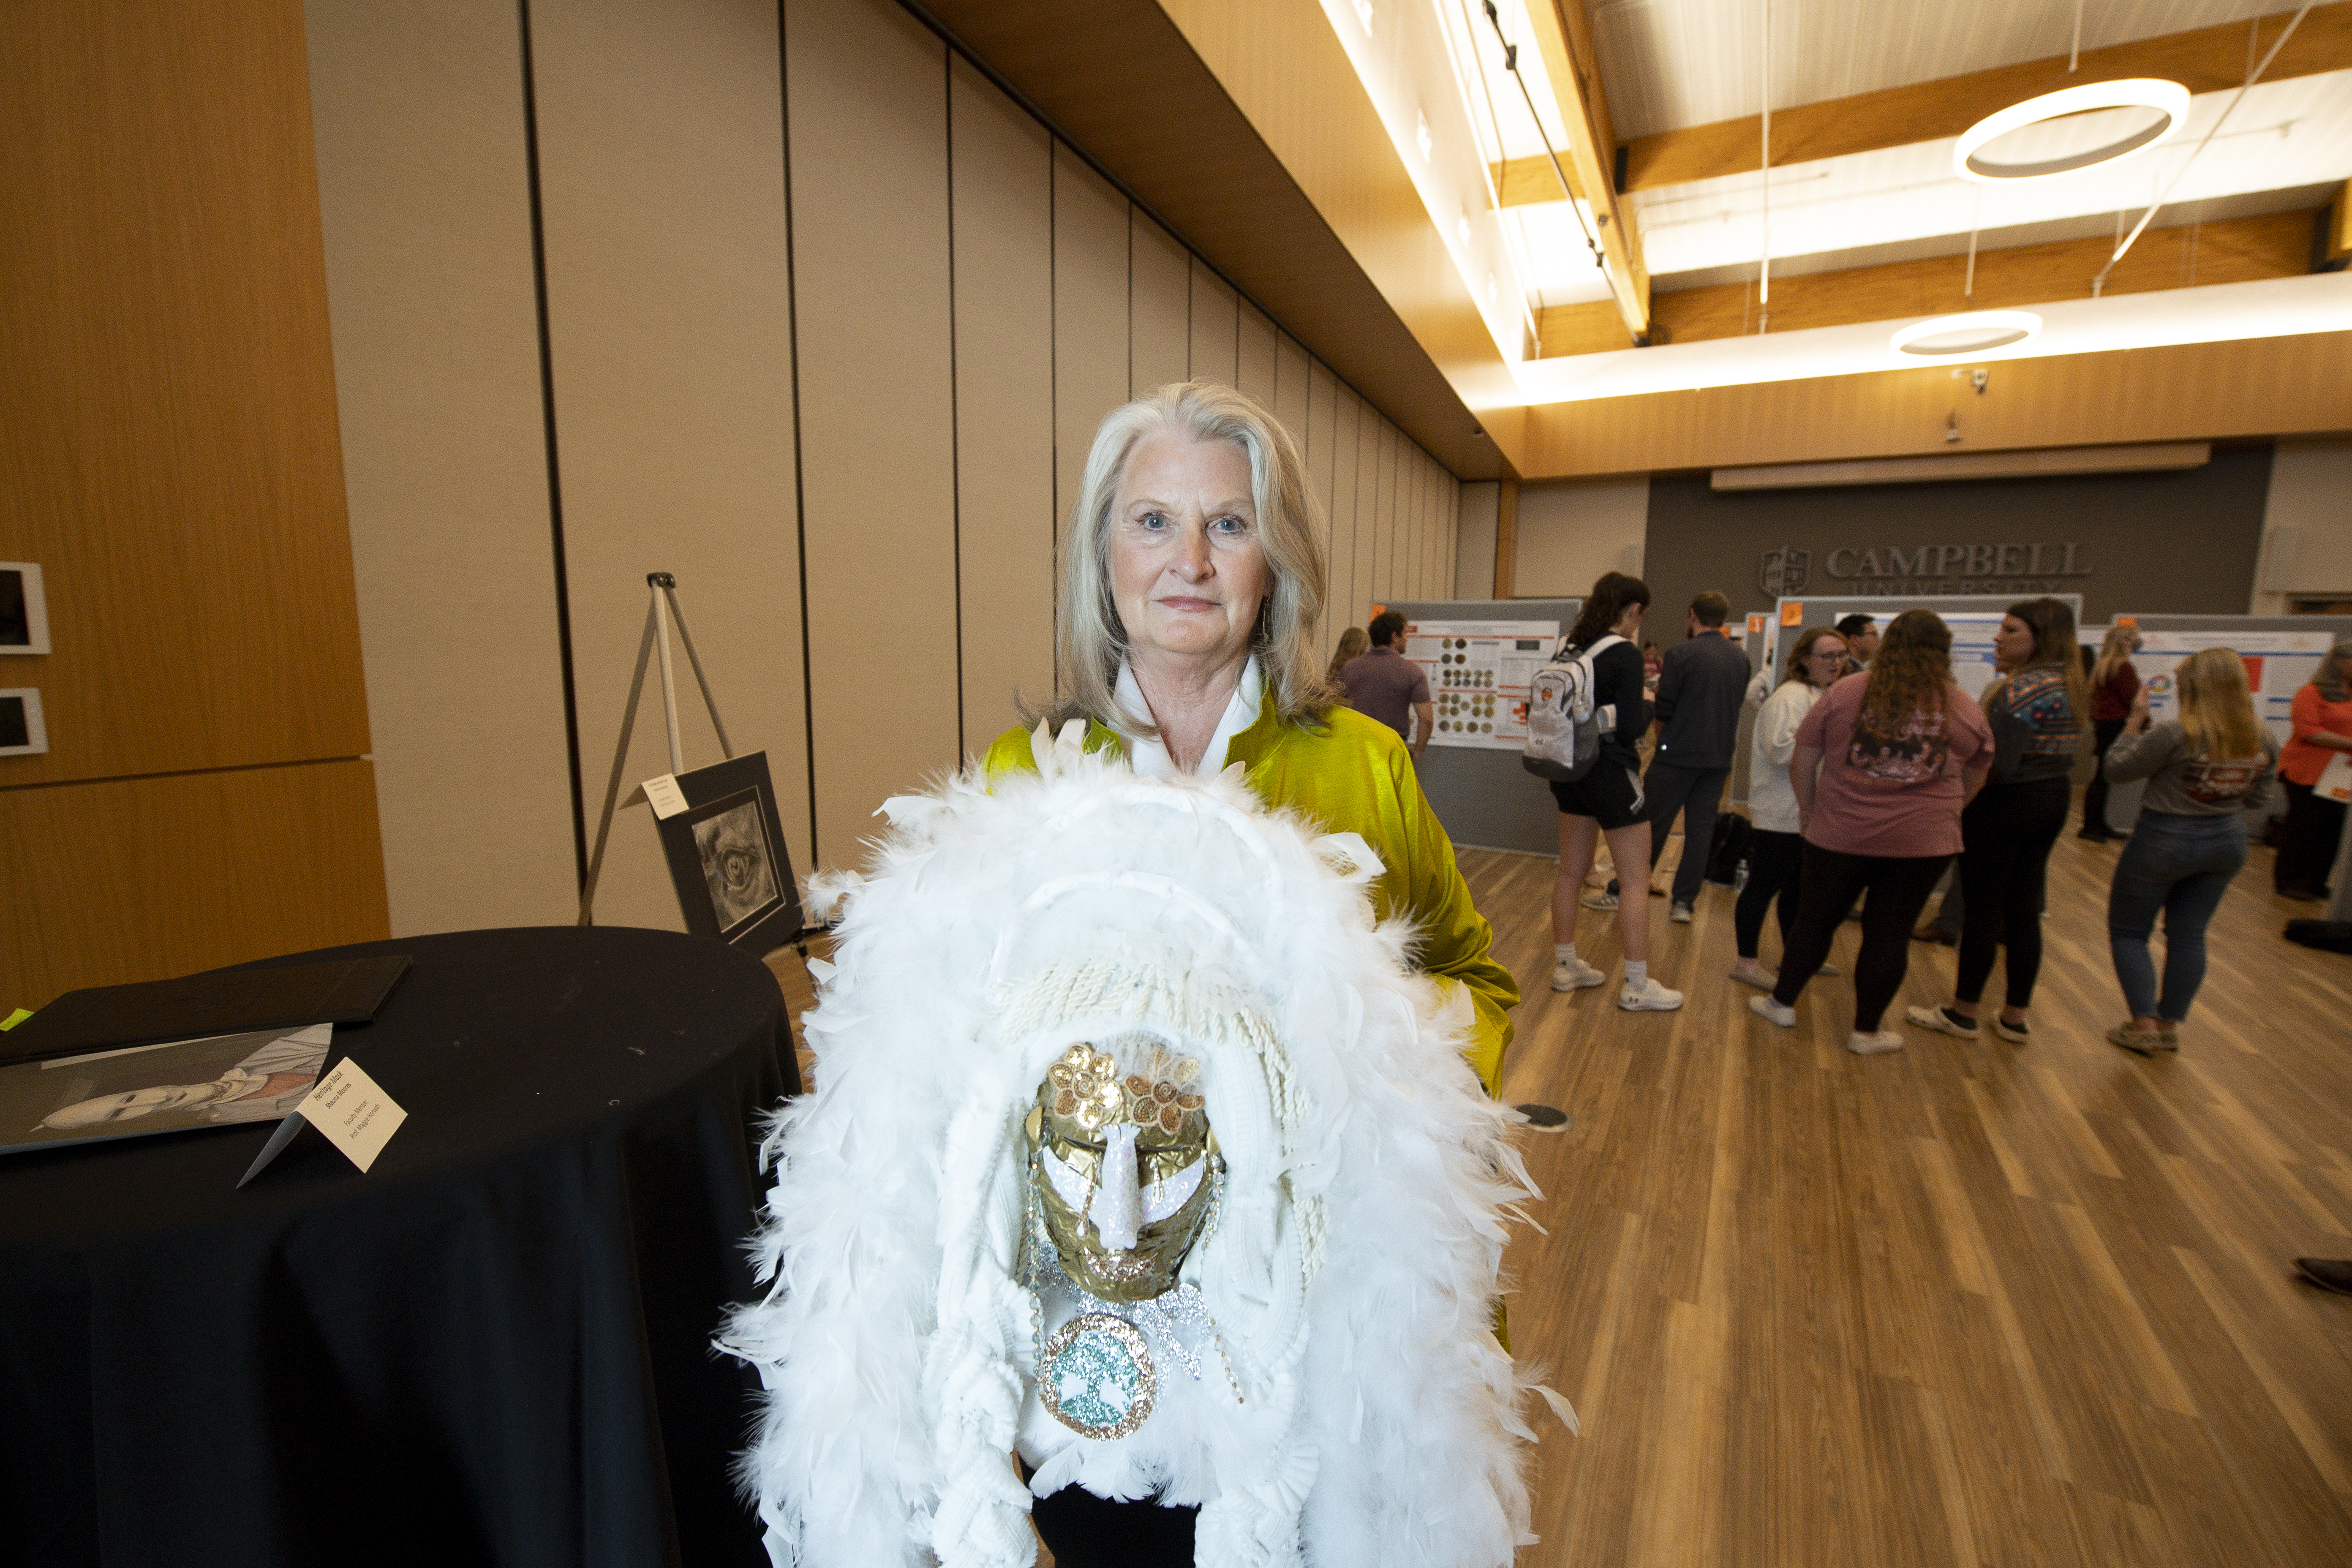 Artist showcases her work at the Symposium